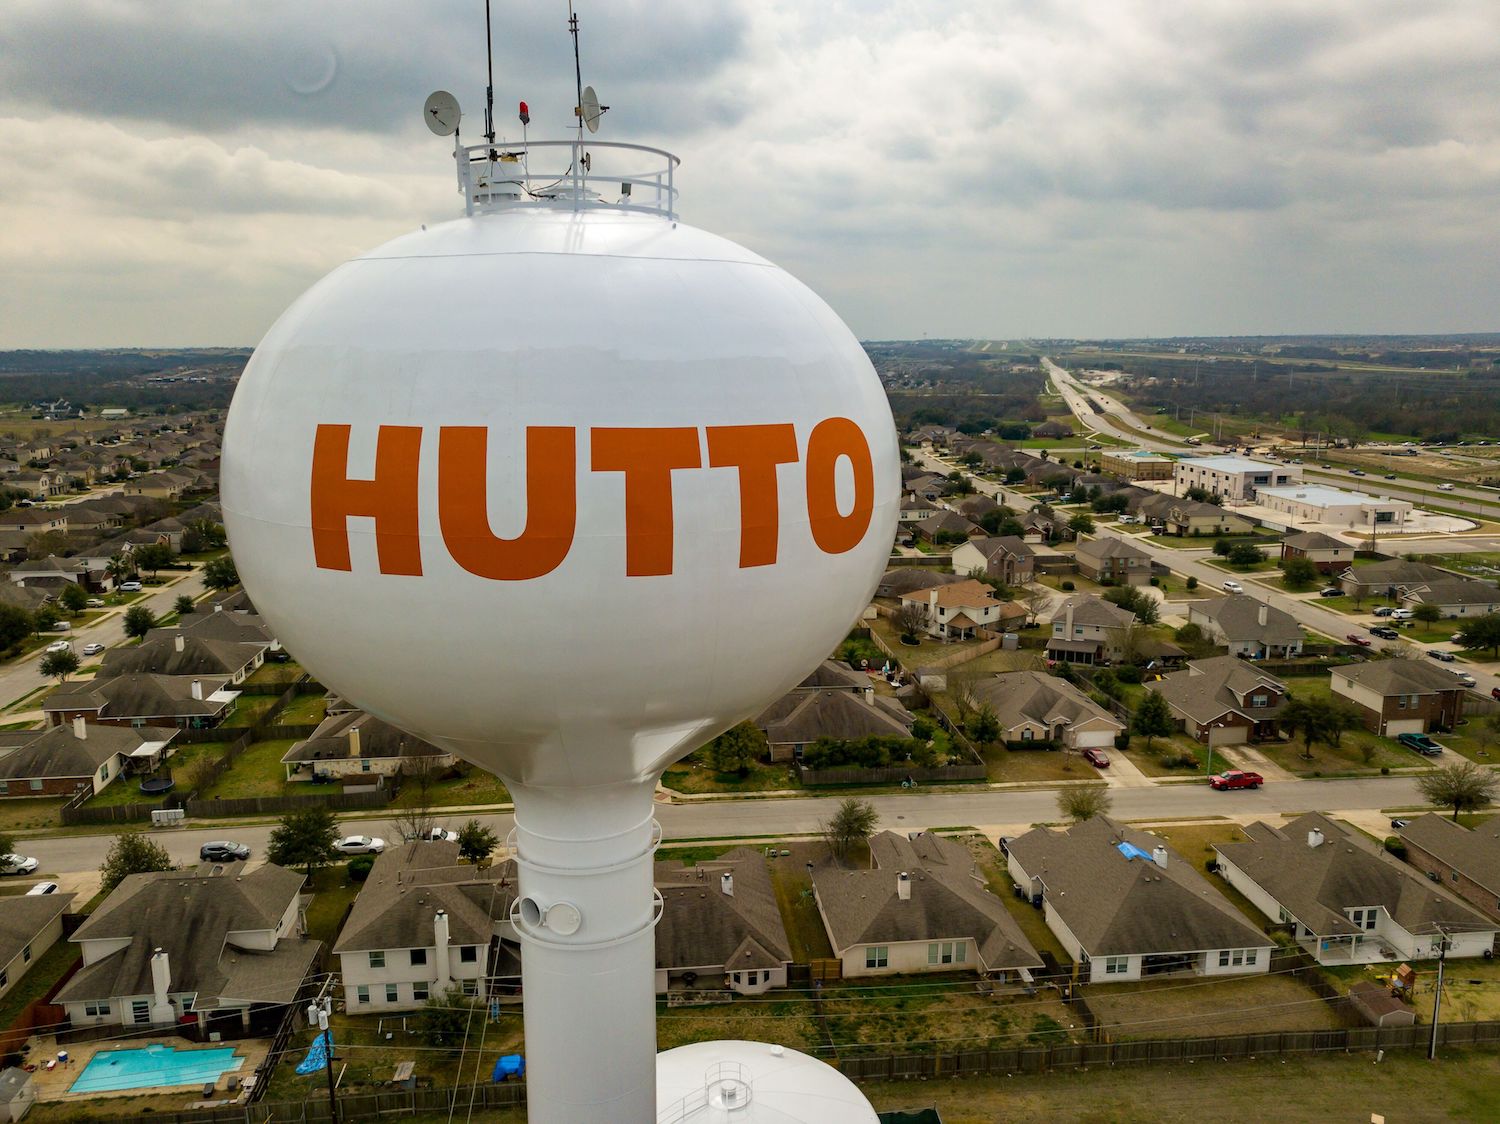 Hutto City Council Approves Proposal for New Mixed-Use Development Project